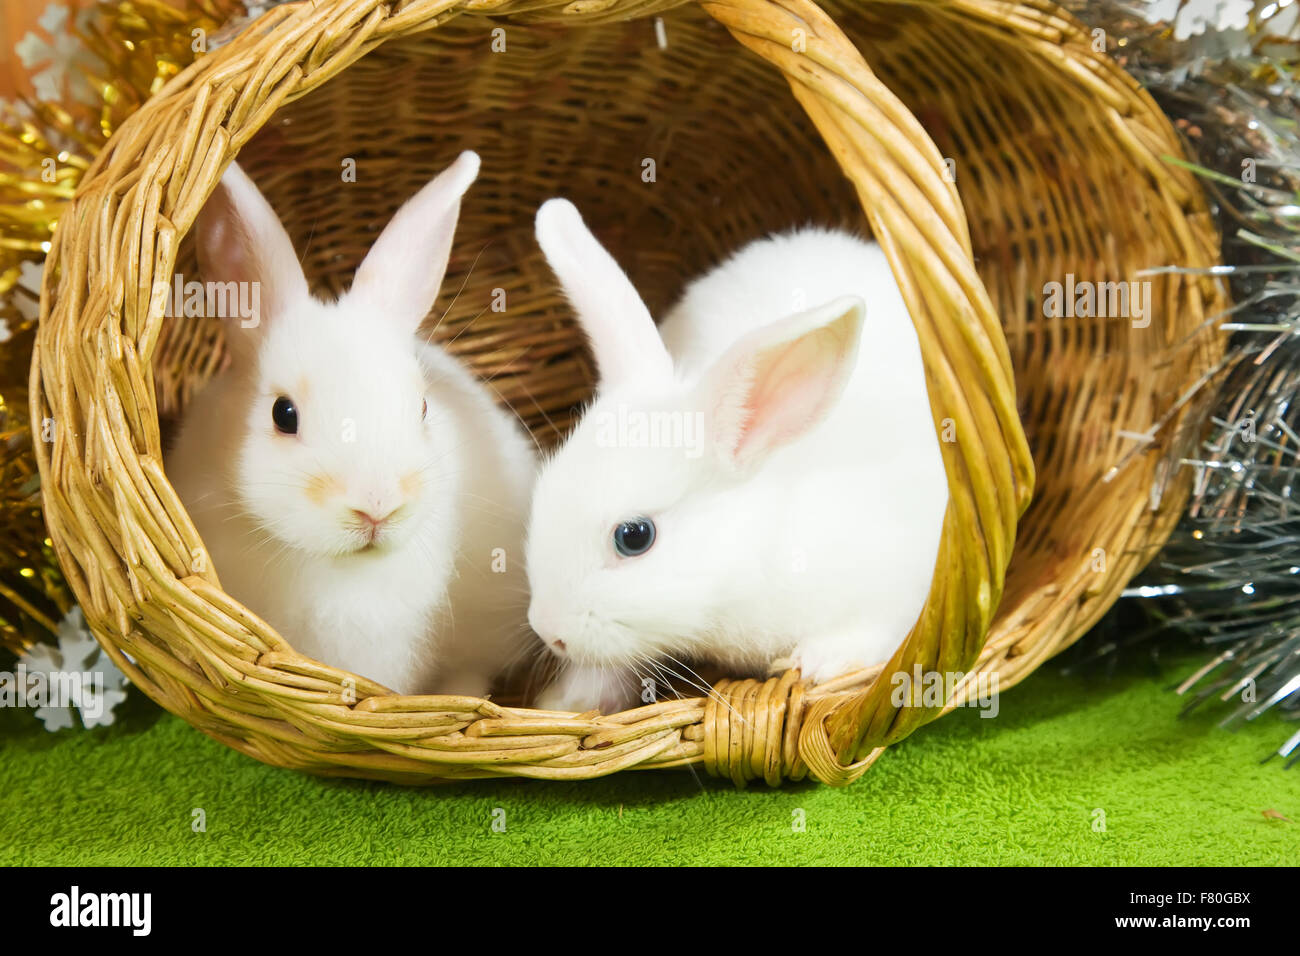 Two white rabbits in basket against spangle Stock Photo